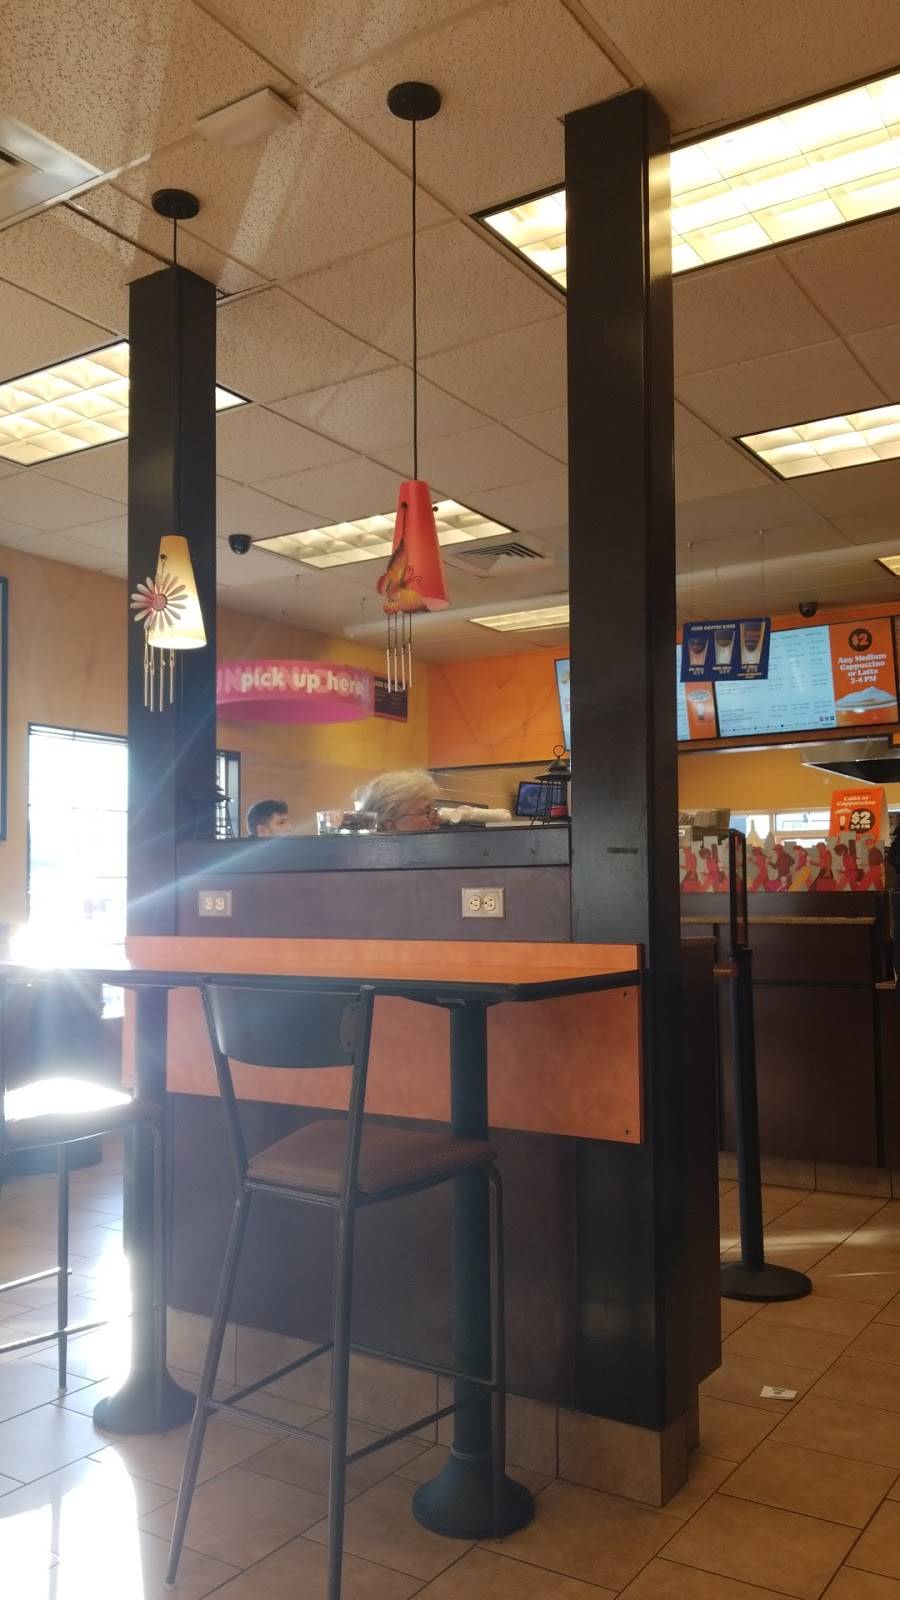 Dunkin Donuts | cafe | 77 Stony Hill Rd, Bethel, CT 06801, USA | 2037979549 OR +1 203-797-9549